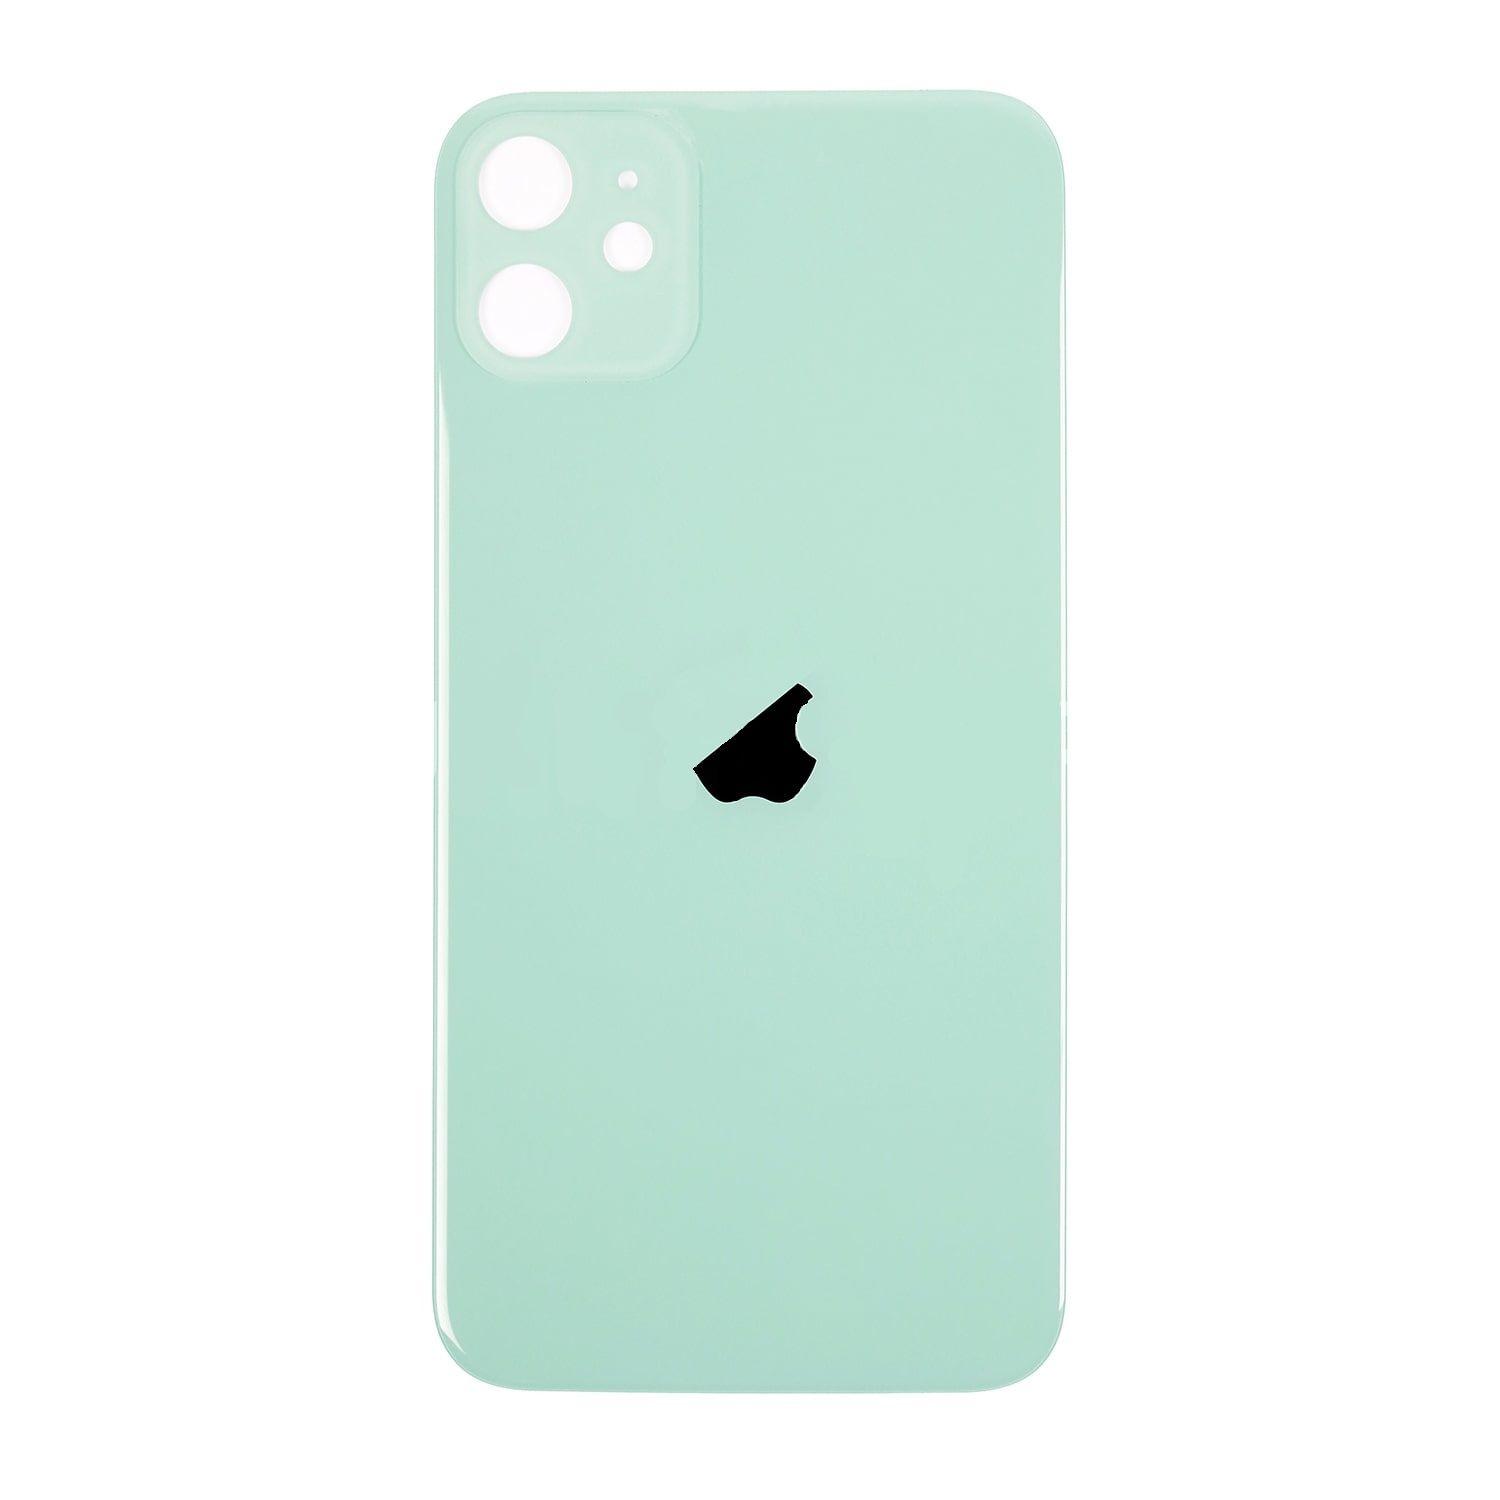 Iphone 11 green flip without camera glass